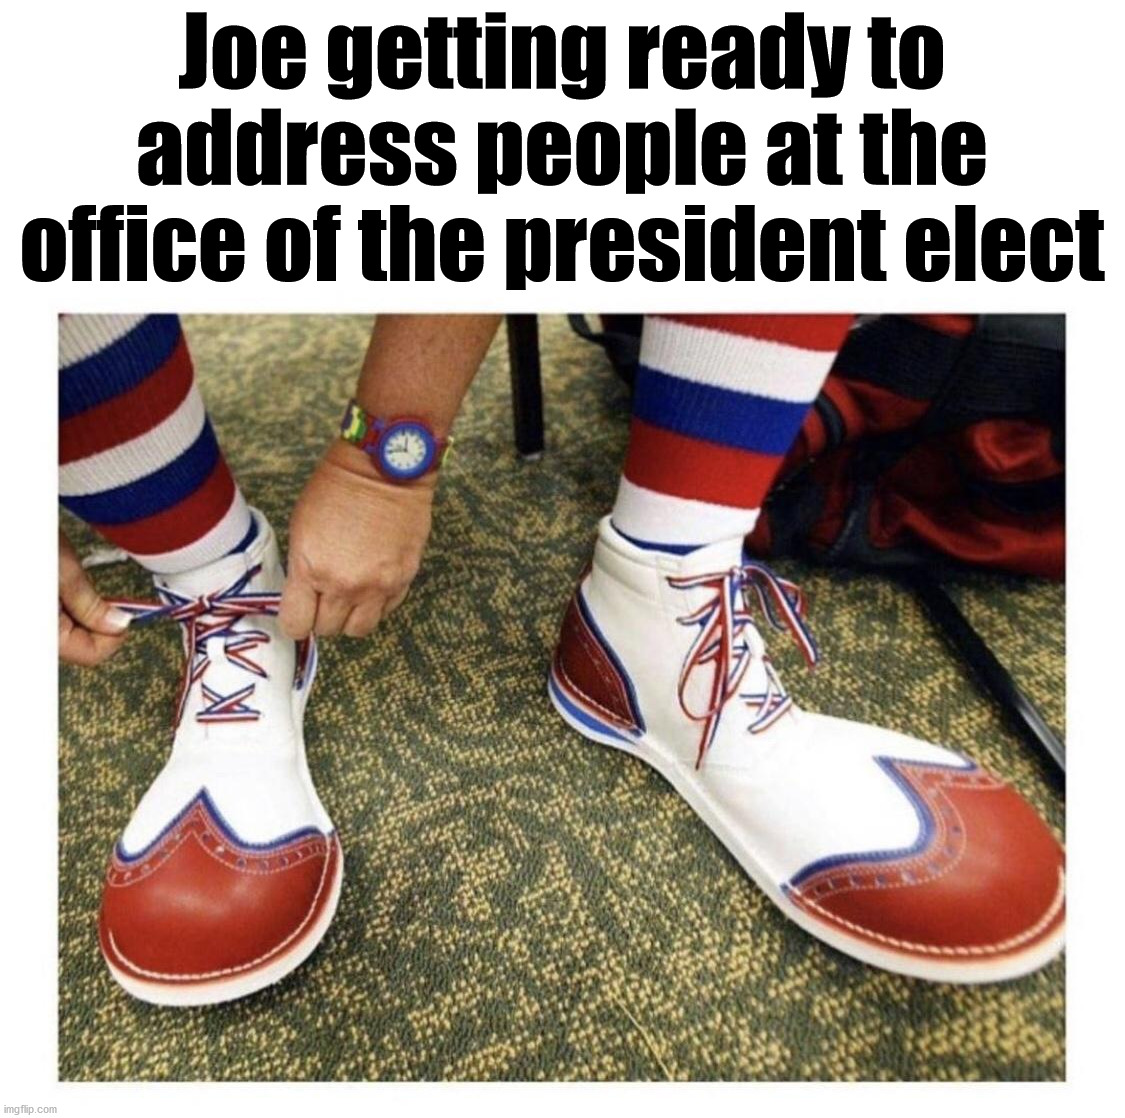 Not saying he is a clown but do the shoes fit? | Joe getting ready to address people at the office of the president elect | image tagged in joe biden,clown,political meme | made w/ Imgflip meme maker